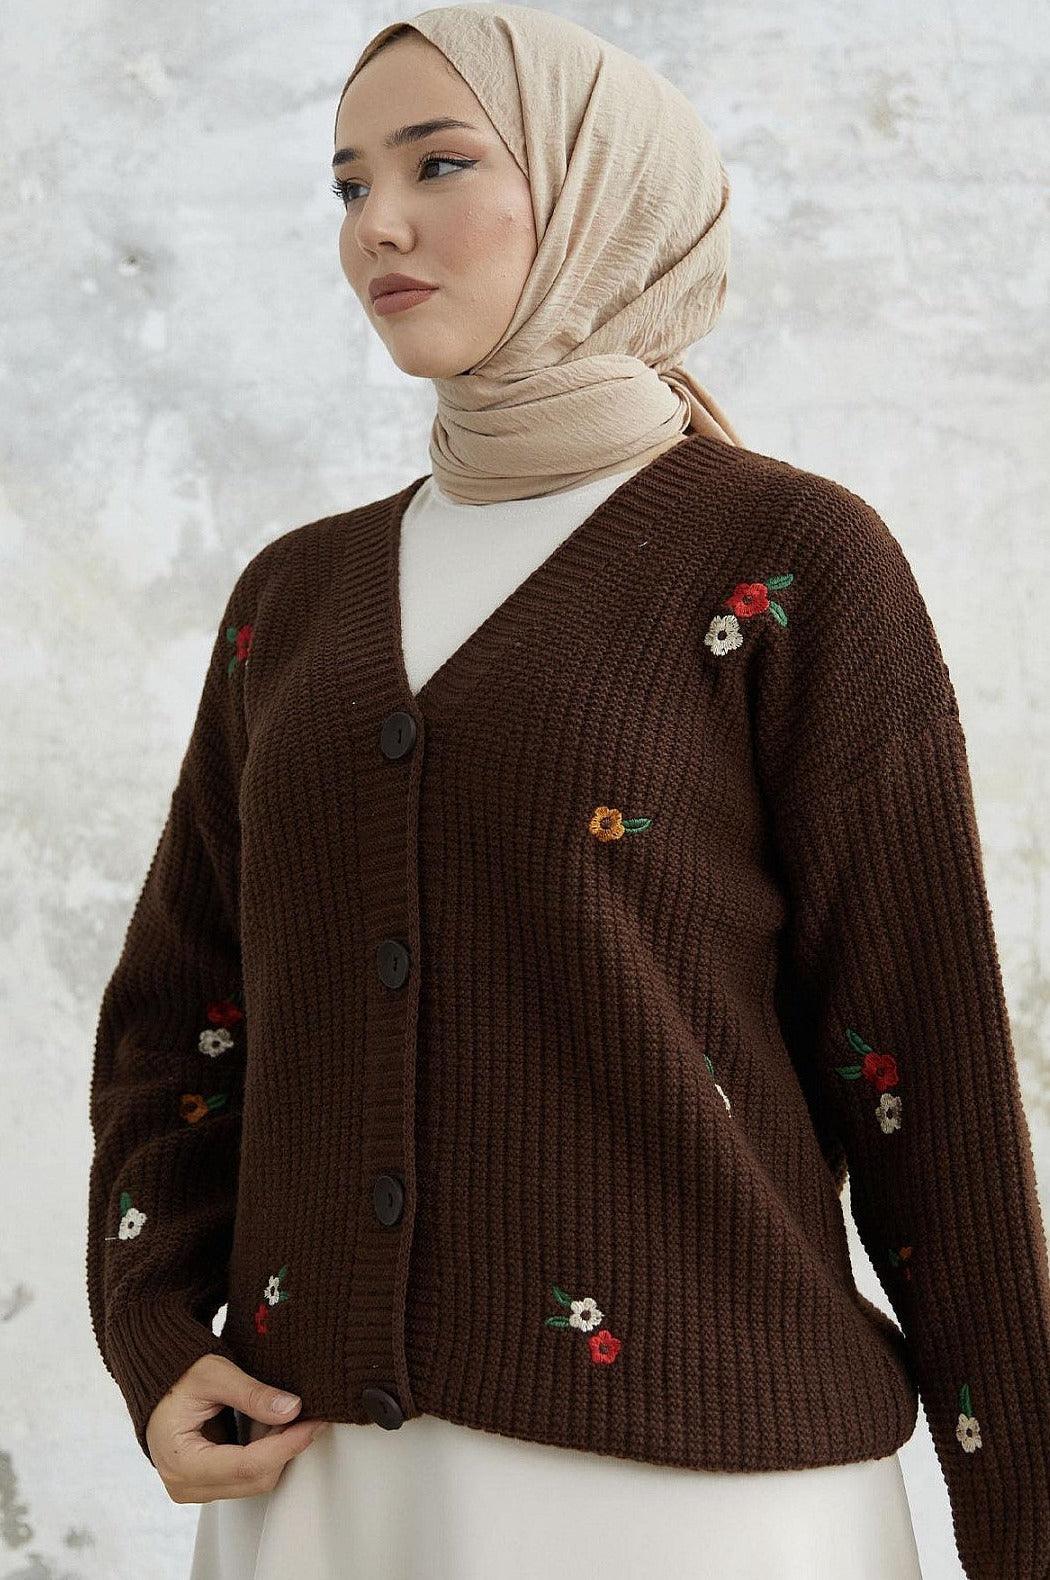 Floral Embroidered Cardigan Sweater - Dark Brown